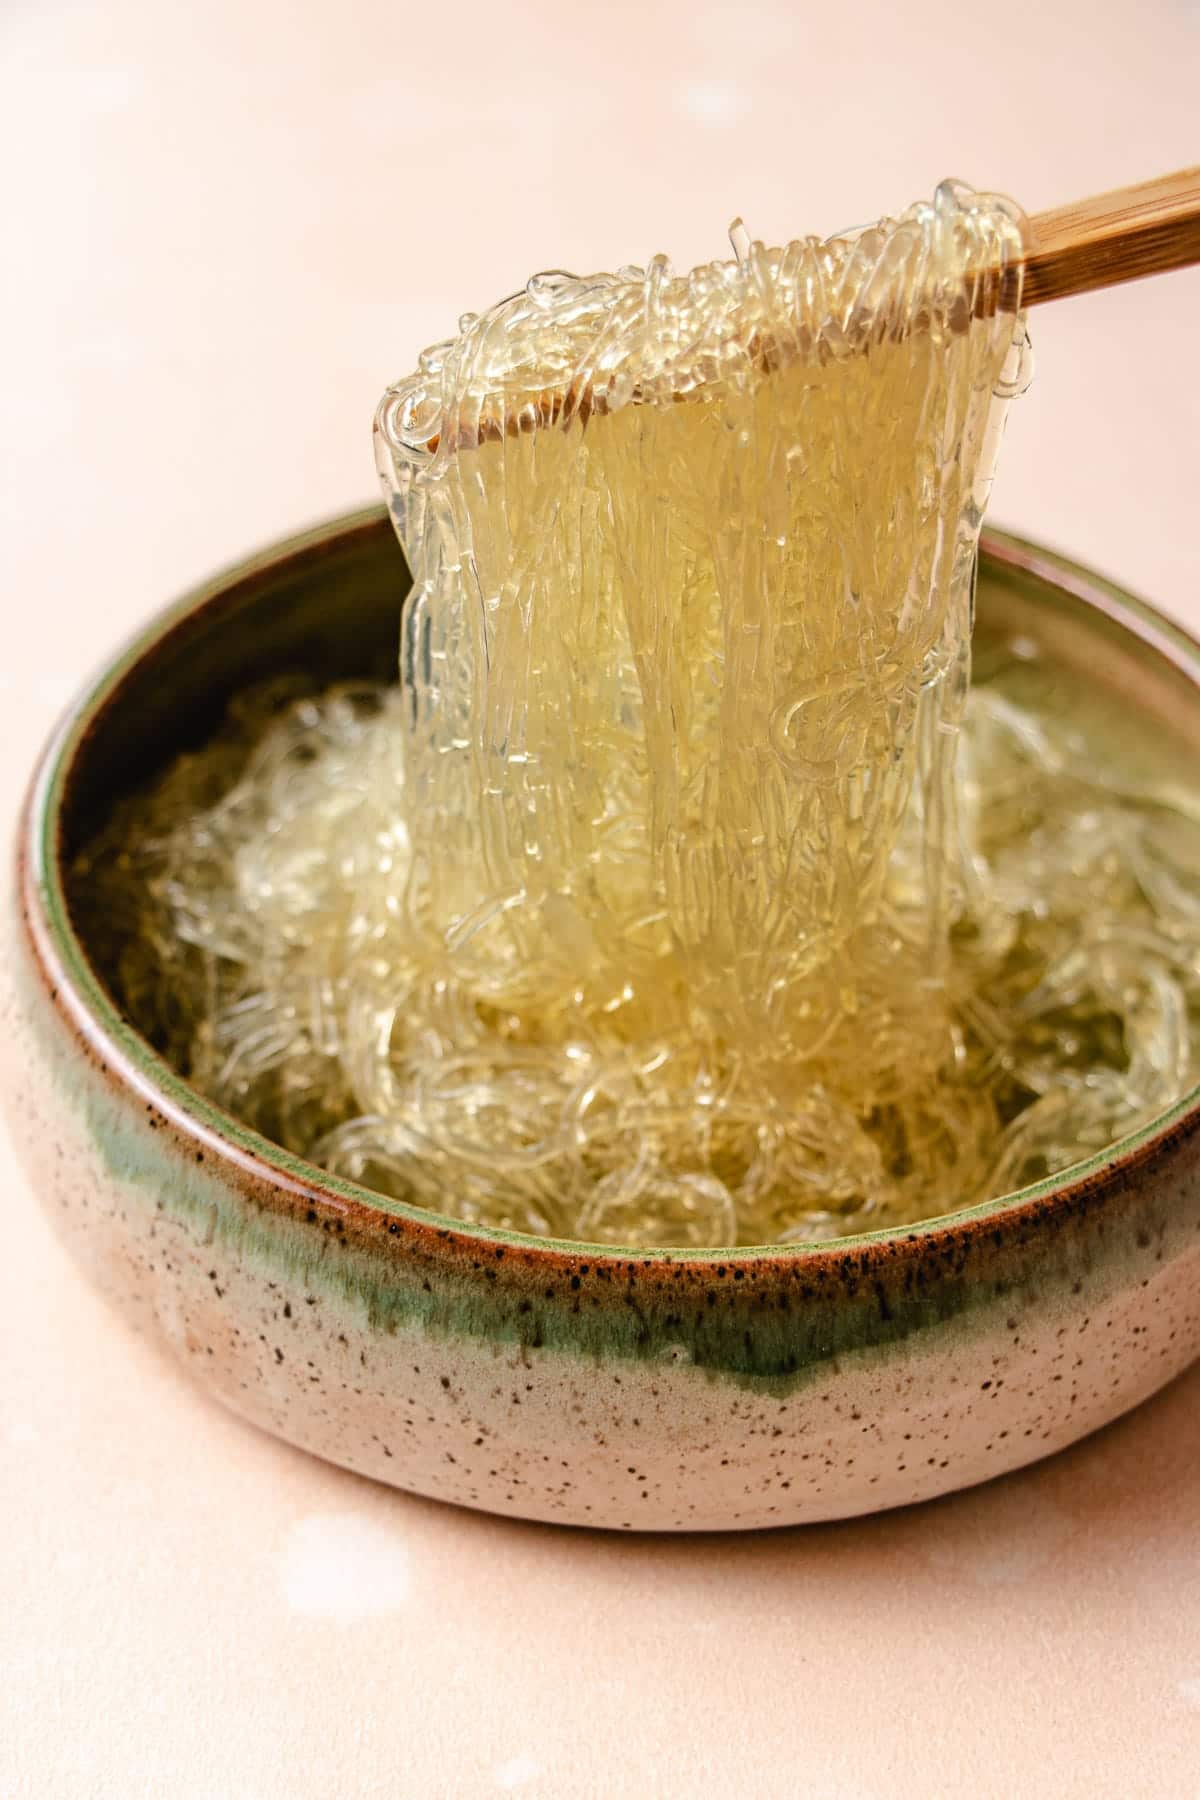 A side close shot shows glass noodles made with kelp that's softened and picking them up with chopsticks